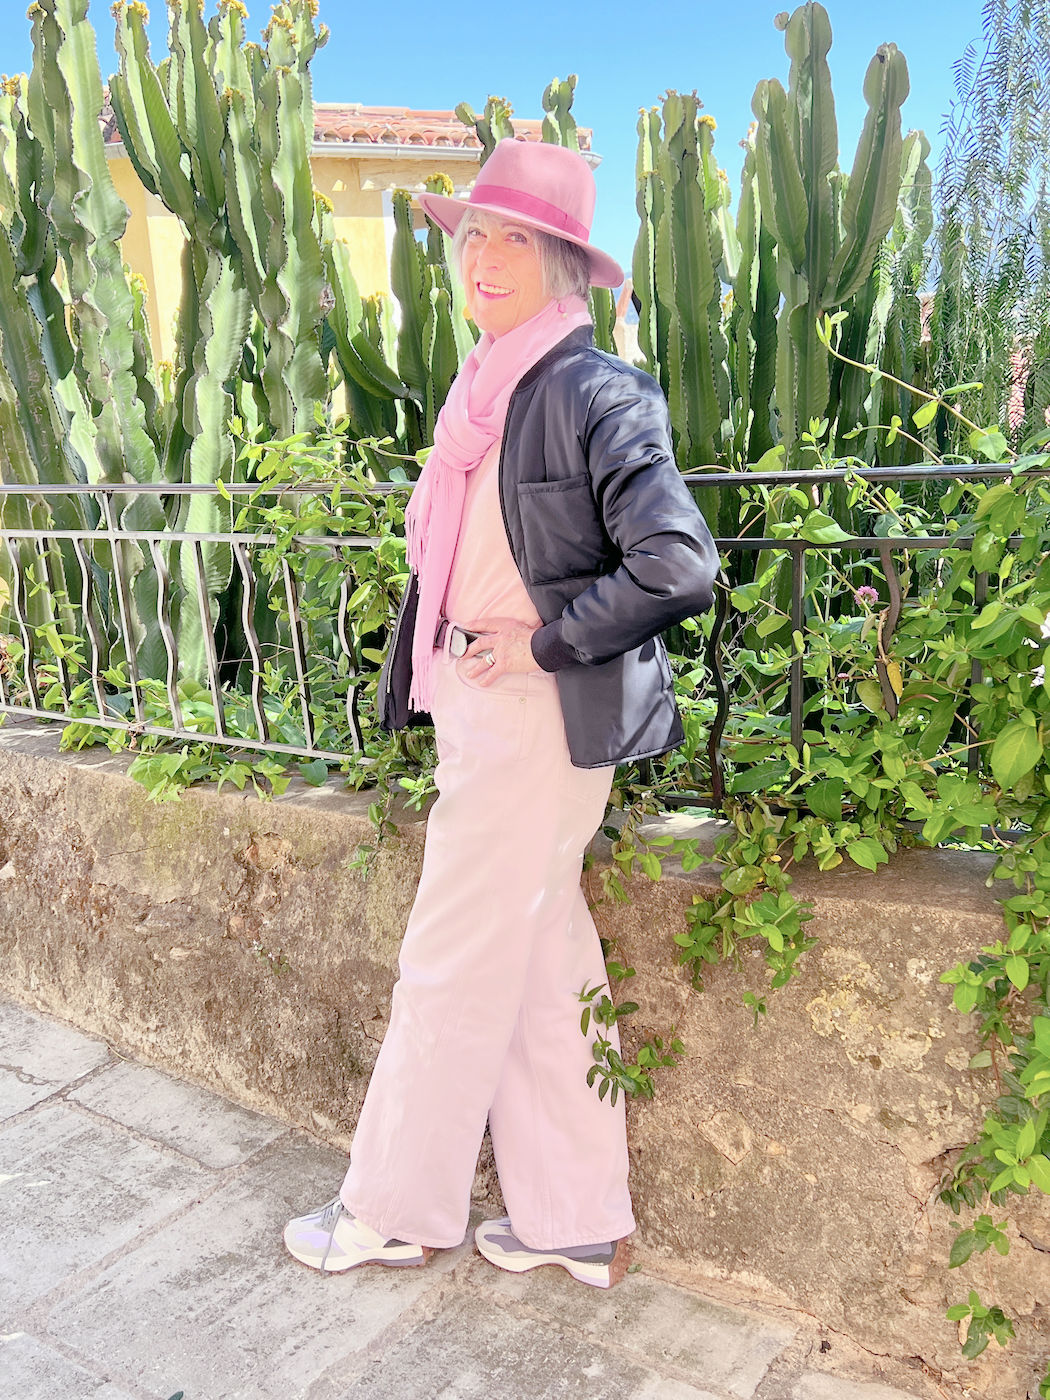 How I am wearing the new style jeans. Wide leg jeans with hat and jacket